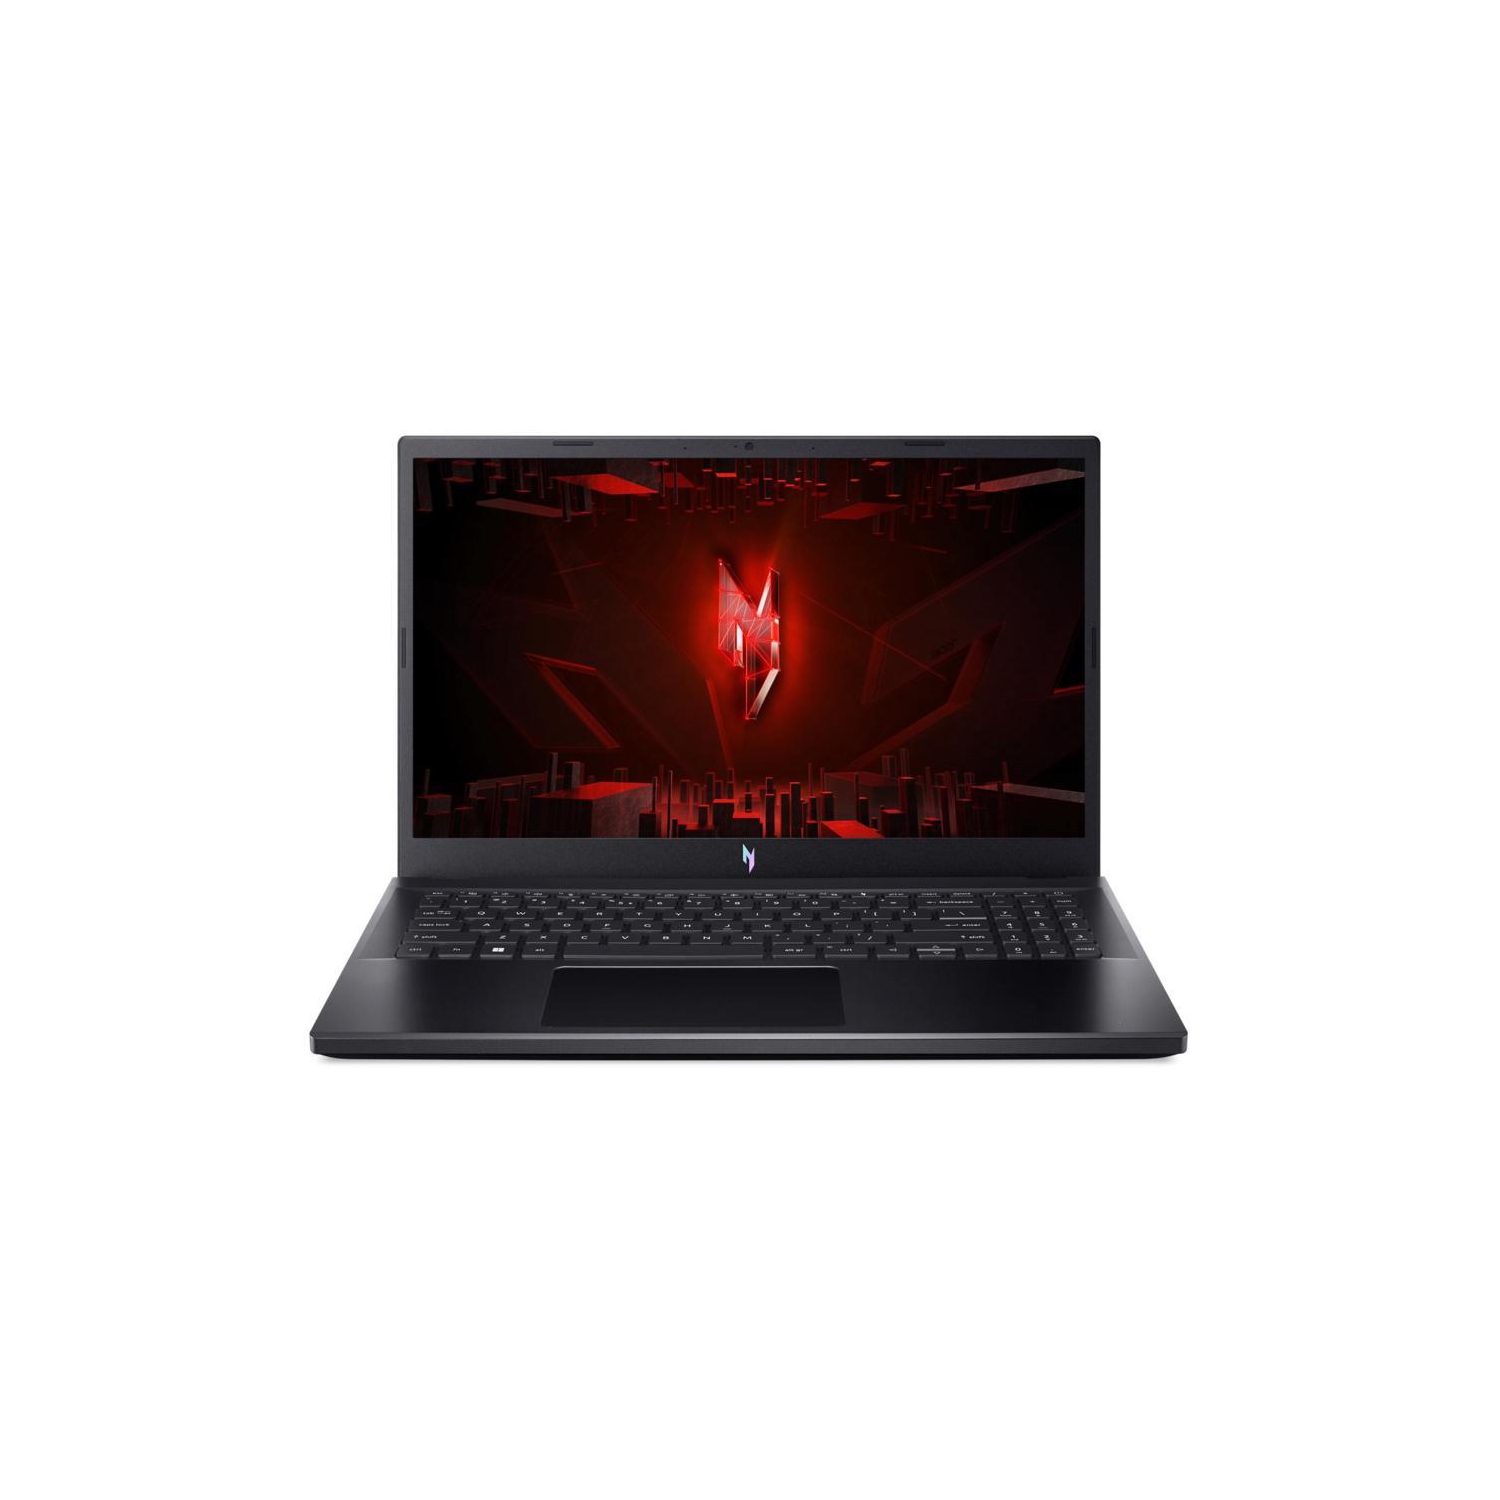 Acer Nitro 5 15.6” LED FHD 144hz IPS Gaming Laptop - Intel Core i5-13420H - Nvidia Geforce RTX 2050 - 16GB DDR5 Memory -512GB SSD - Backlit Keyboard - WiFi6, DTS:X Audio